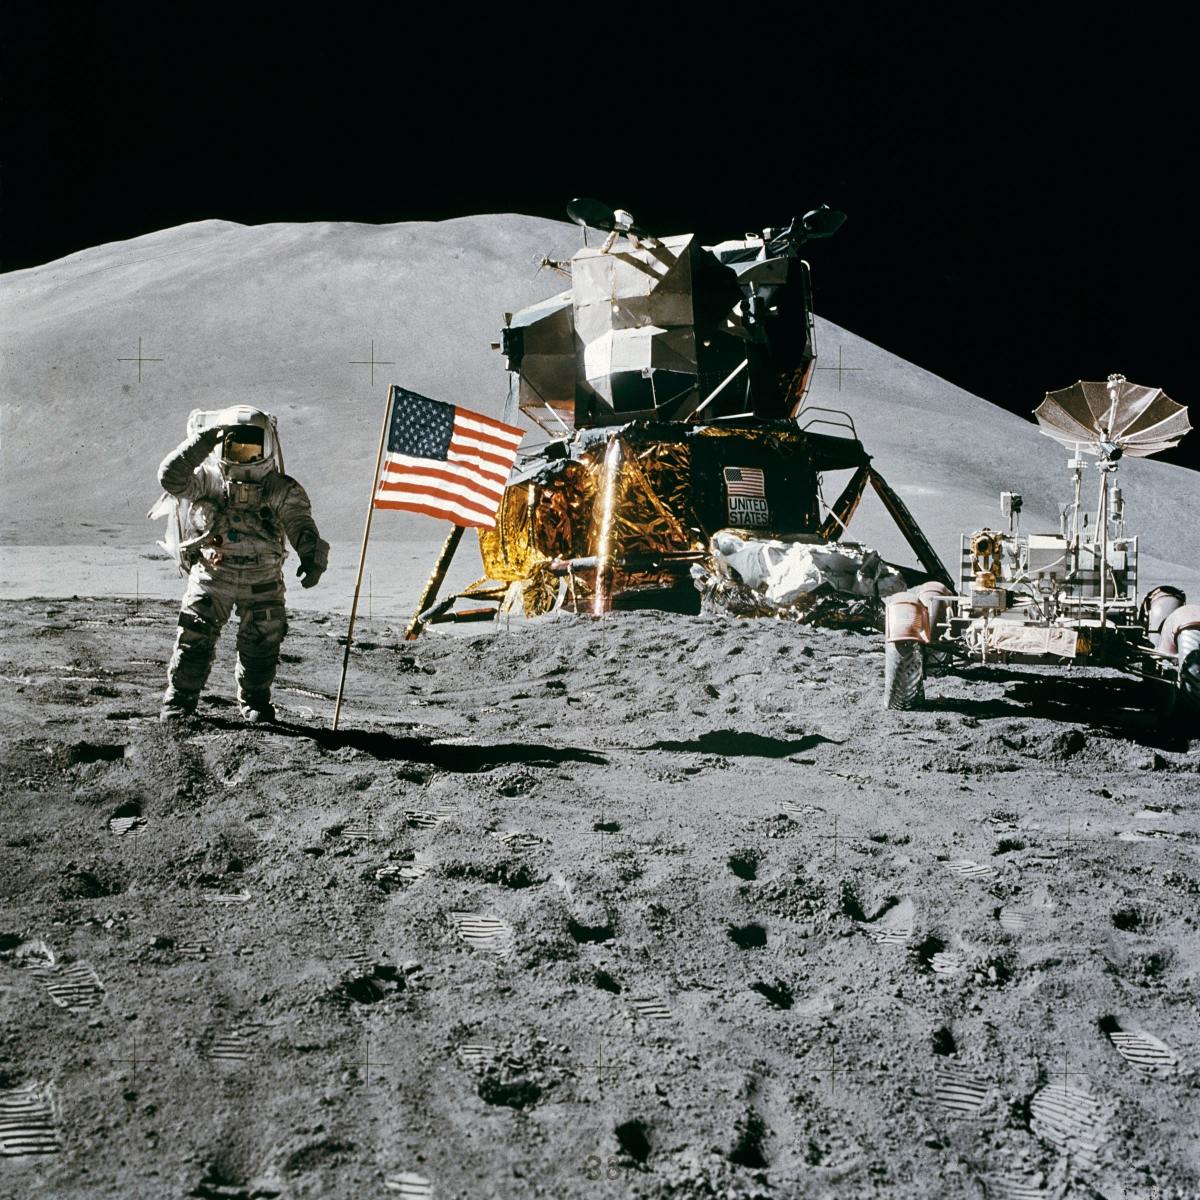 The Apollo 15 moon landing (1971): Shown here is James Irwin, the 8th man to walk on the moon during the 4th human lunar landing.